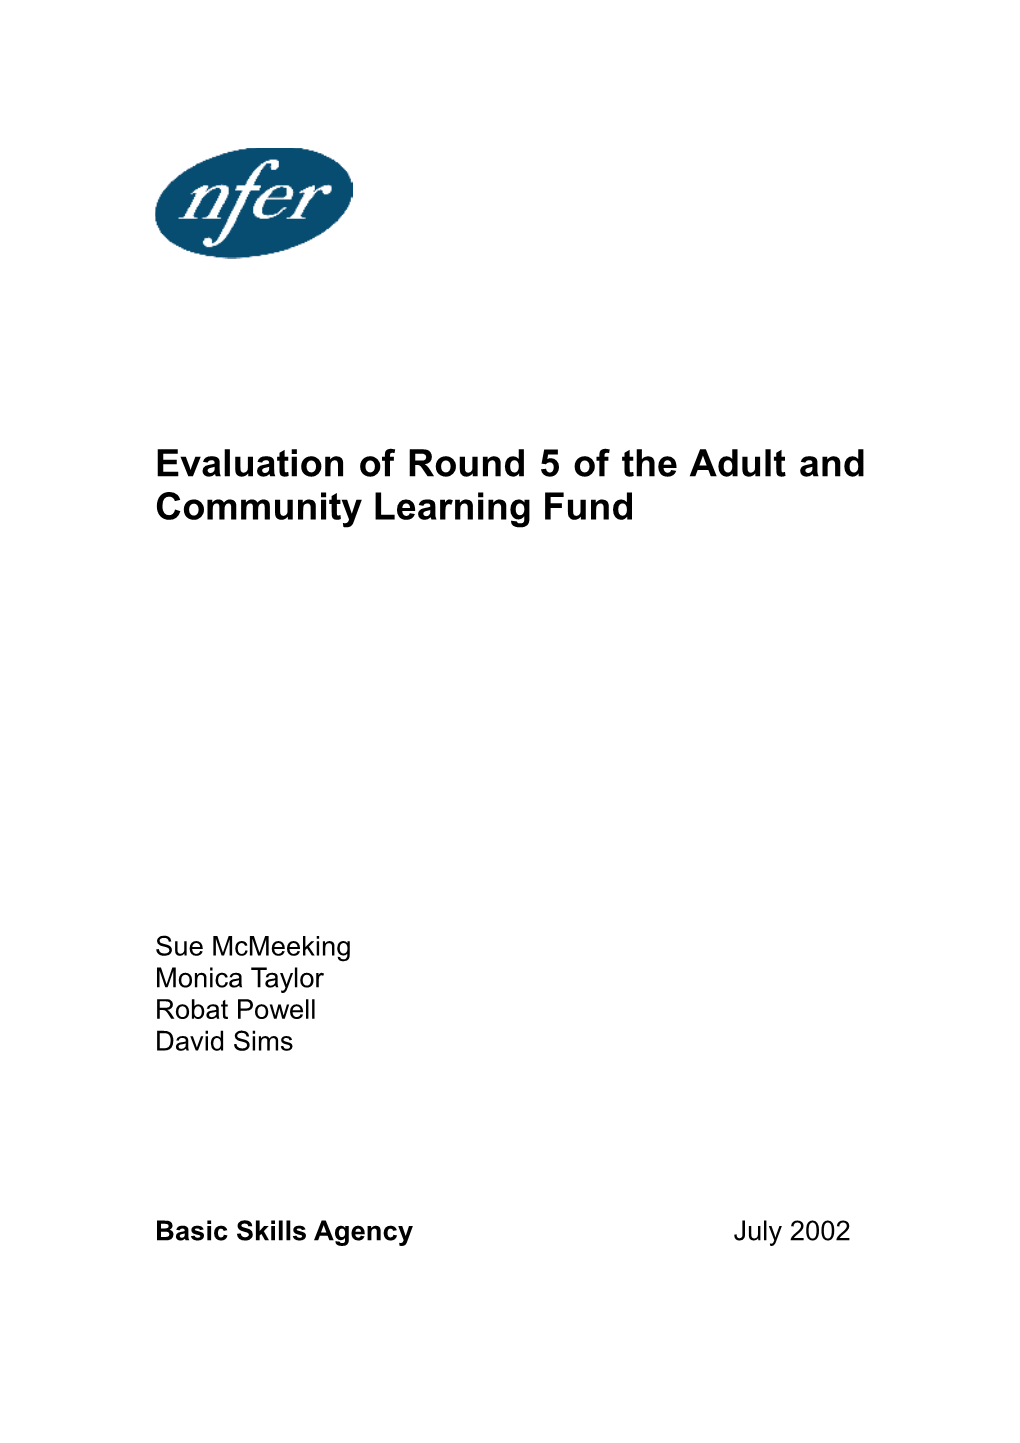 Evaluation of Round 5 of the Adult and Community Learning Fund